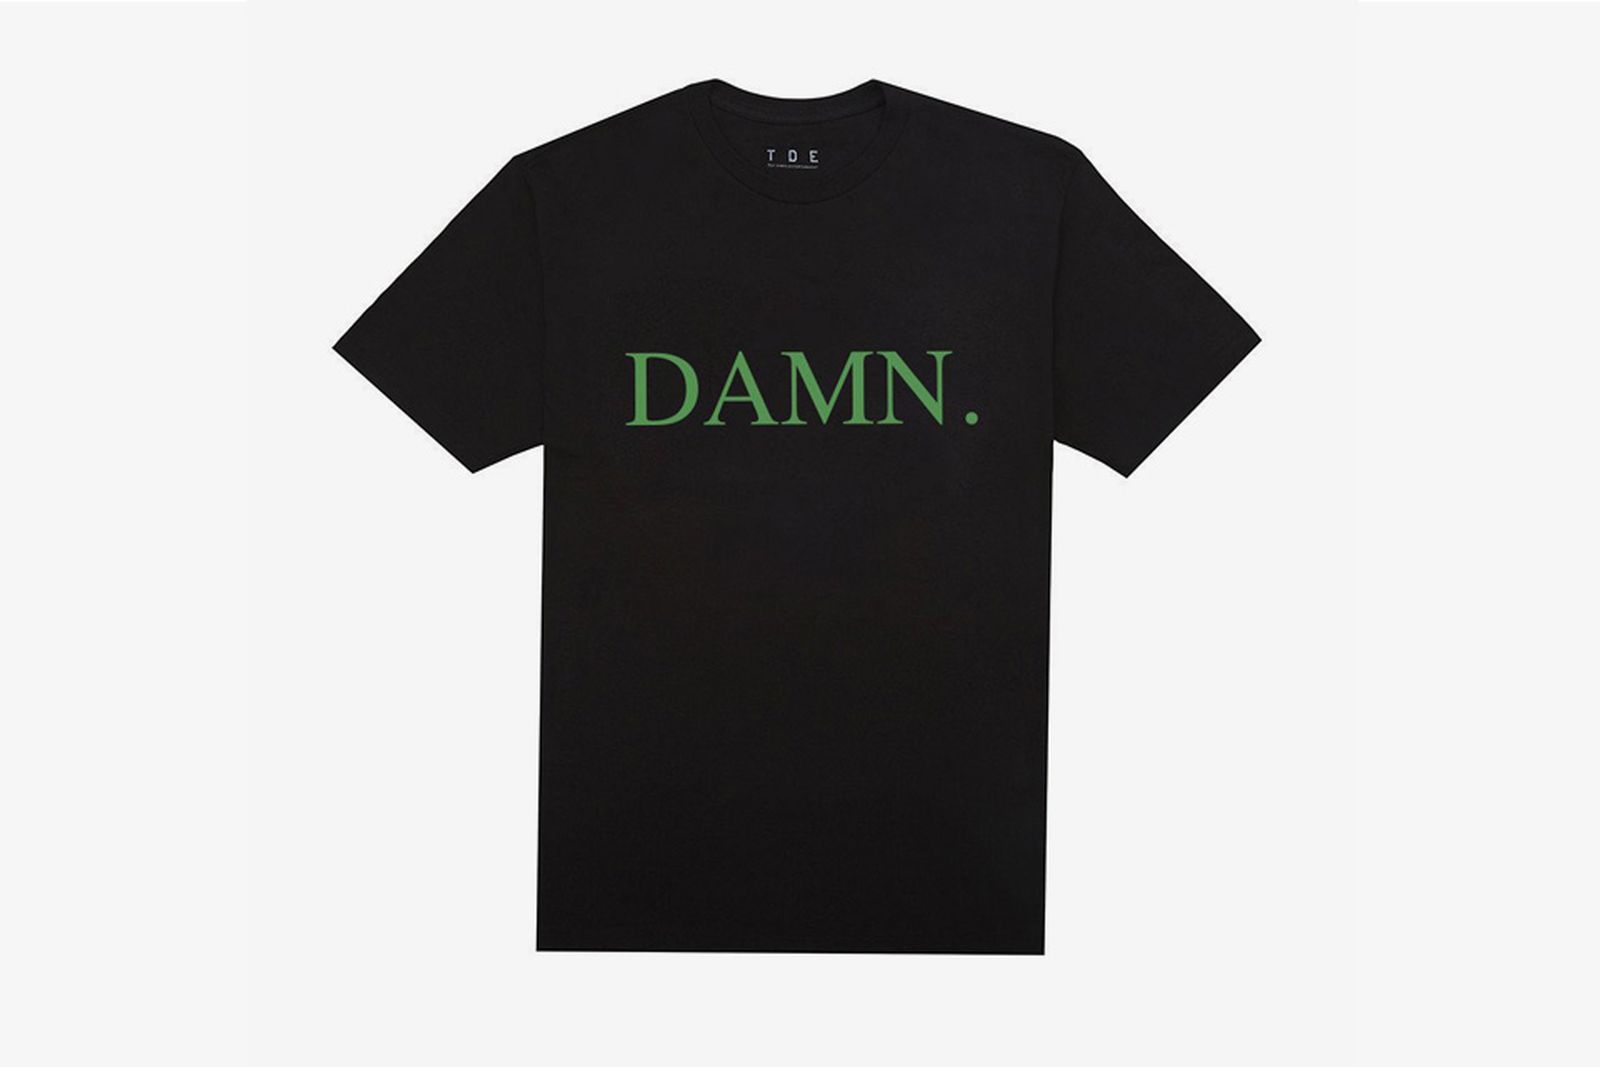 You Can Now Kendrick's 'DAMN.' Tee From The "Humble" Video